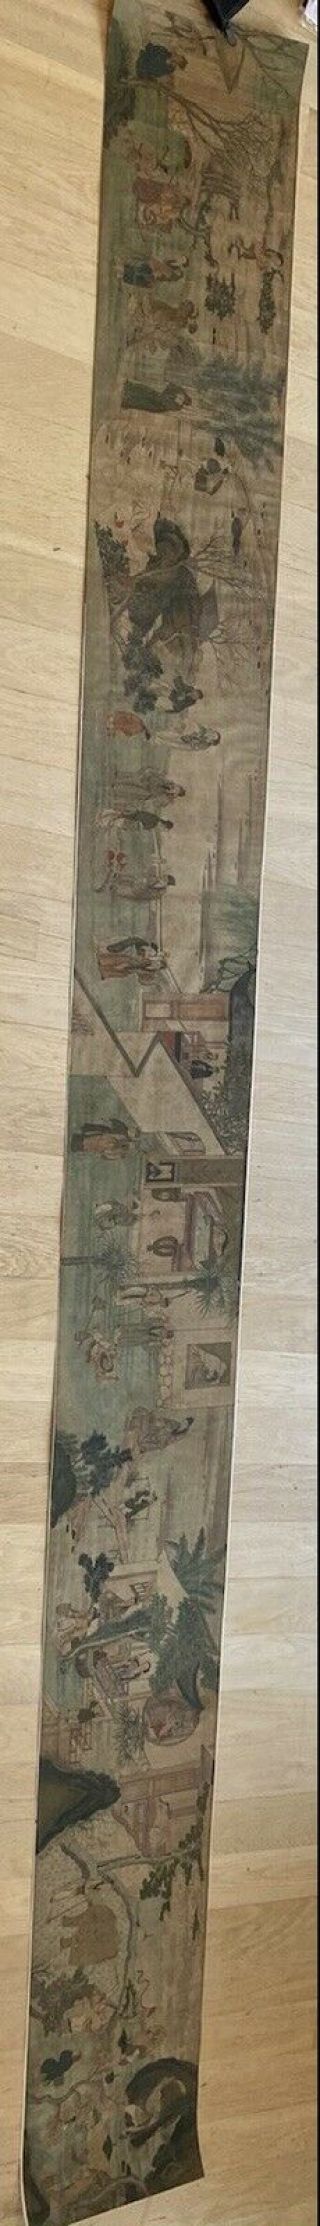 A long early 19th century Qing dynasty Chinese painting on silk 2